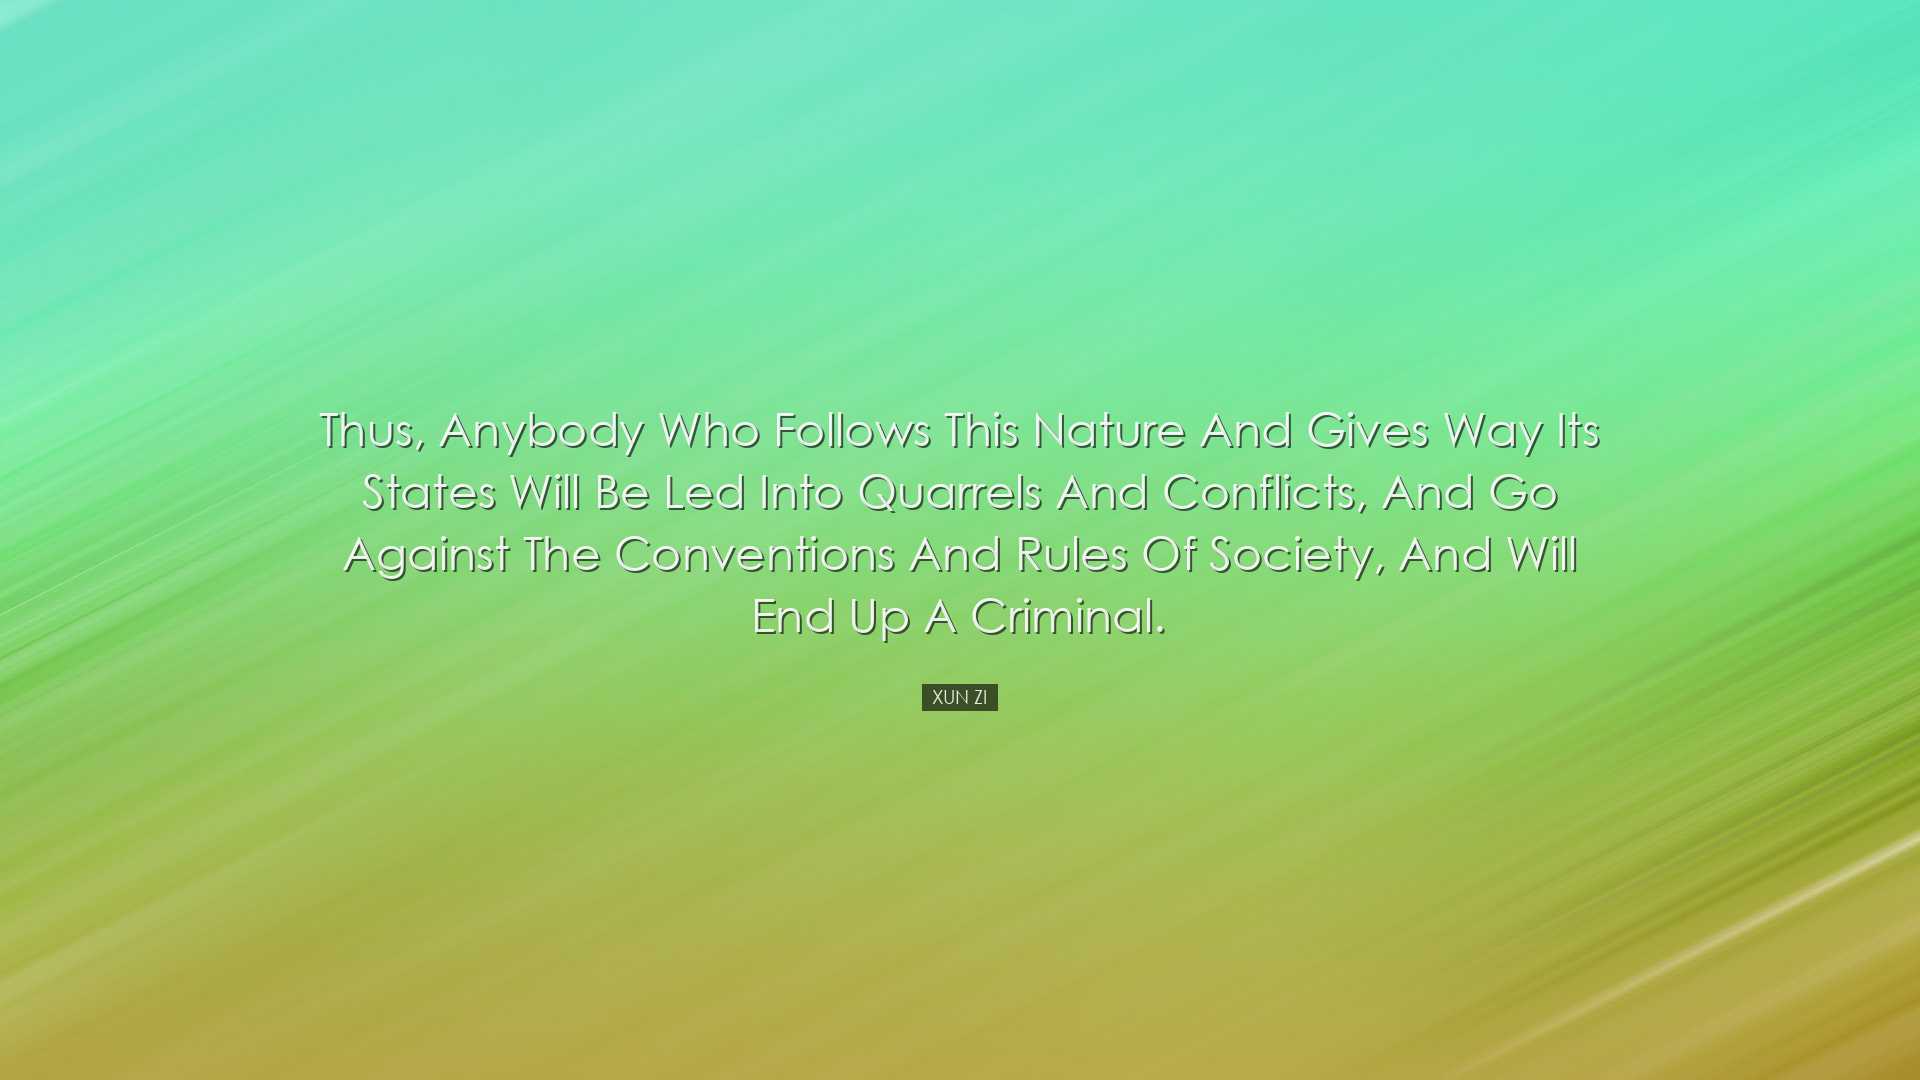 Thus, anybody who follows this nature and gives way its states wil